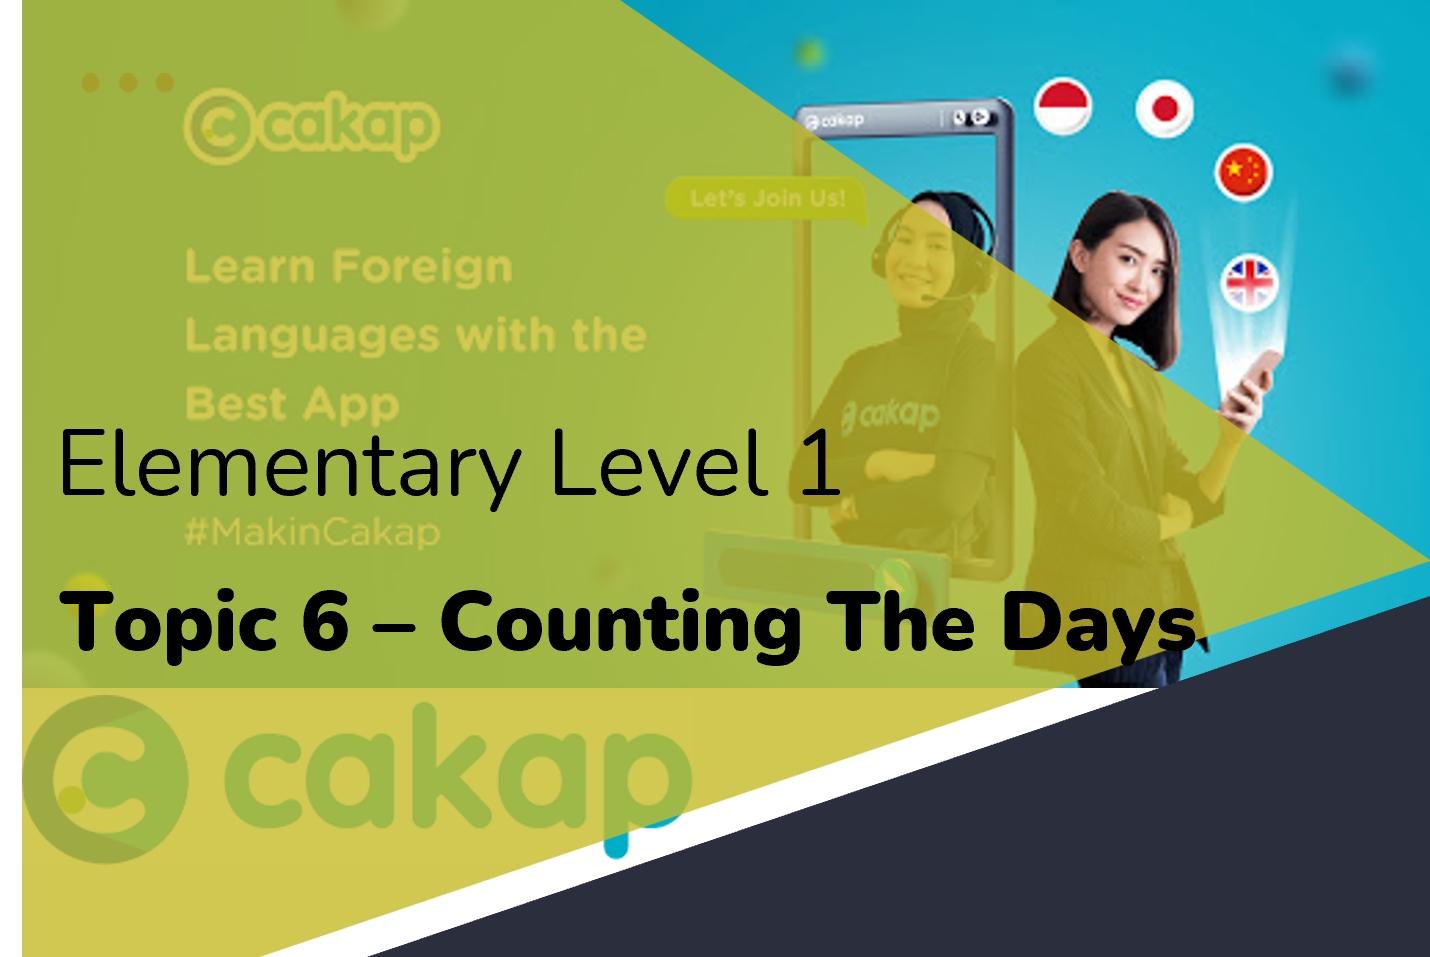 Elementary 1: Topic 6 - Counting The Days